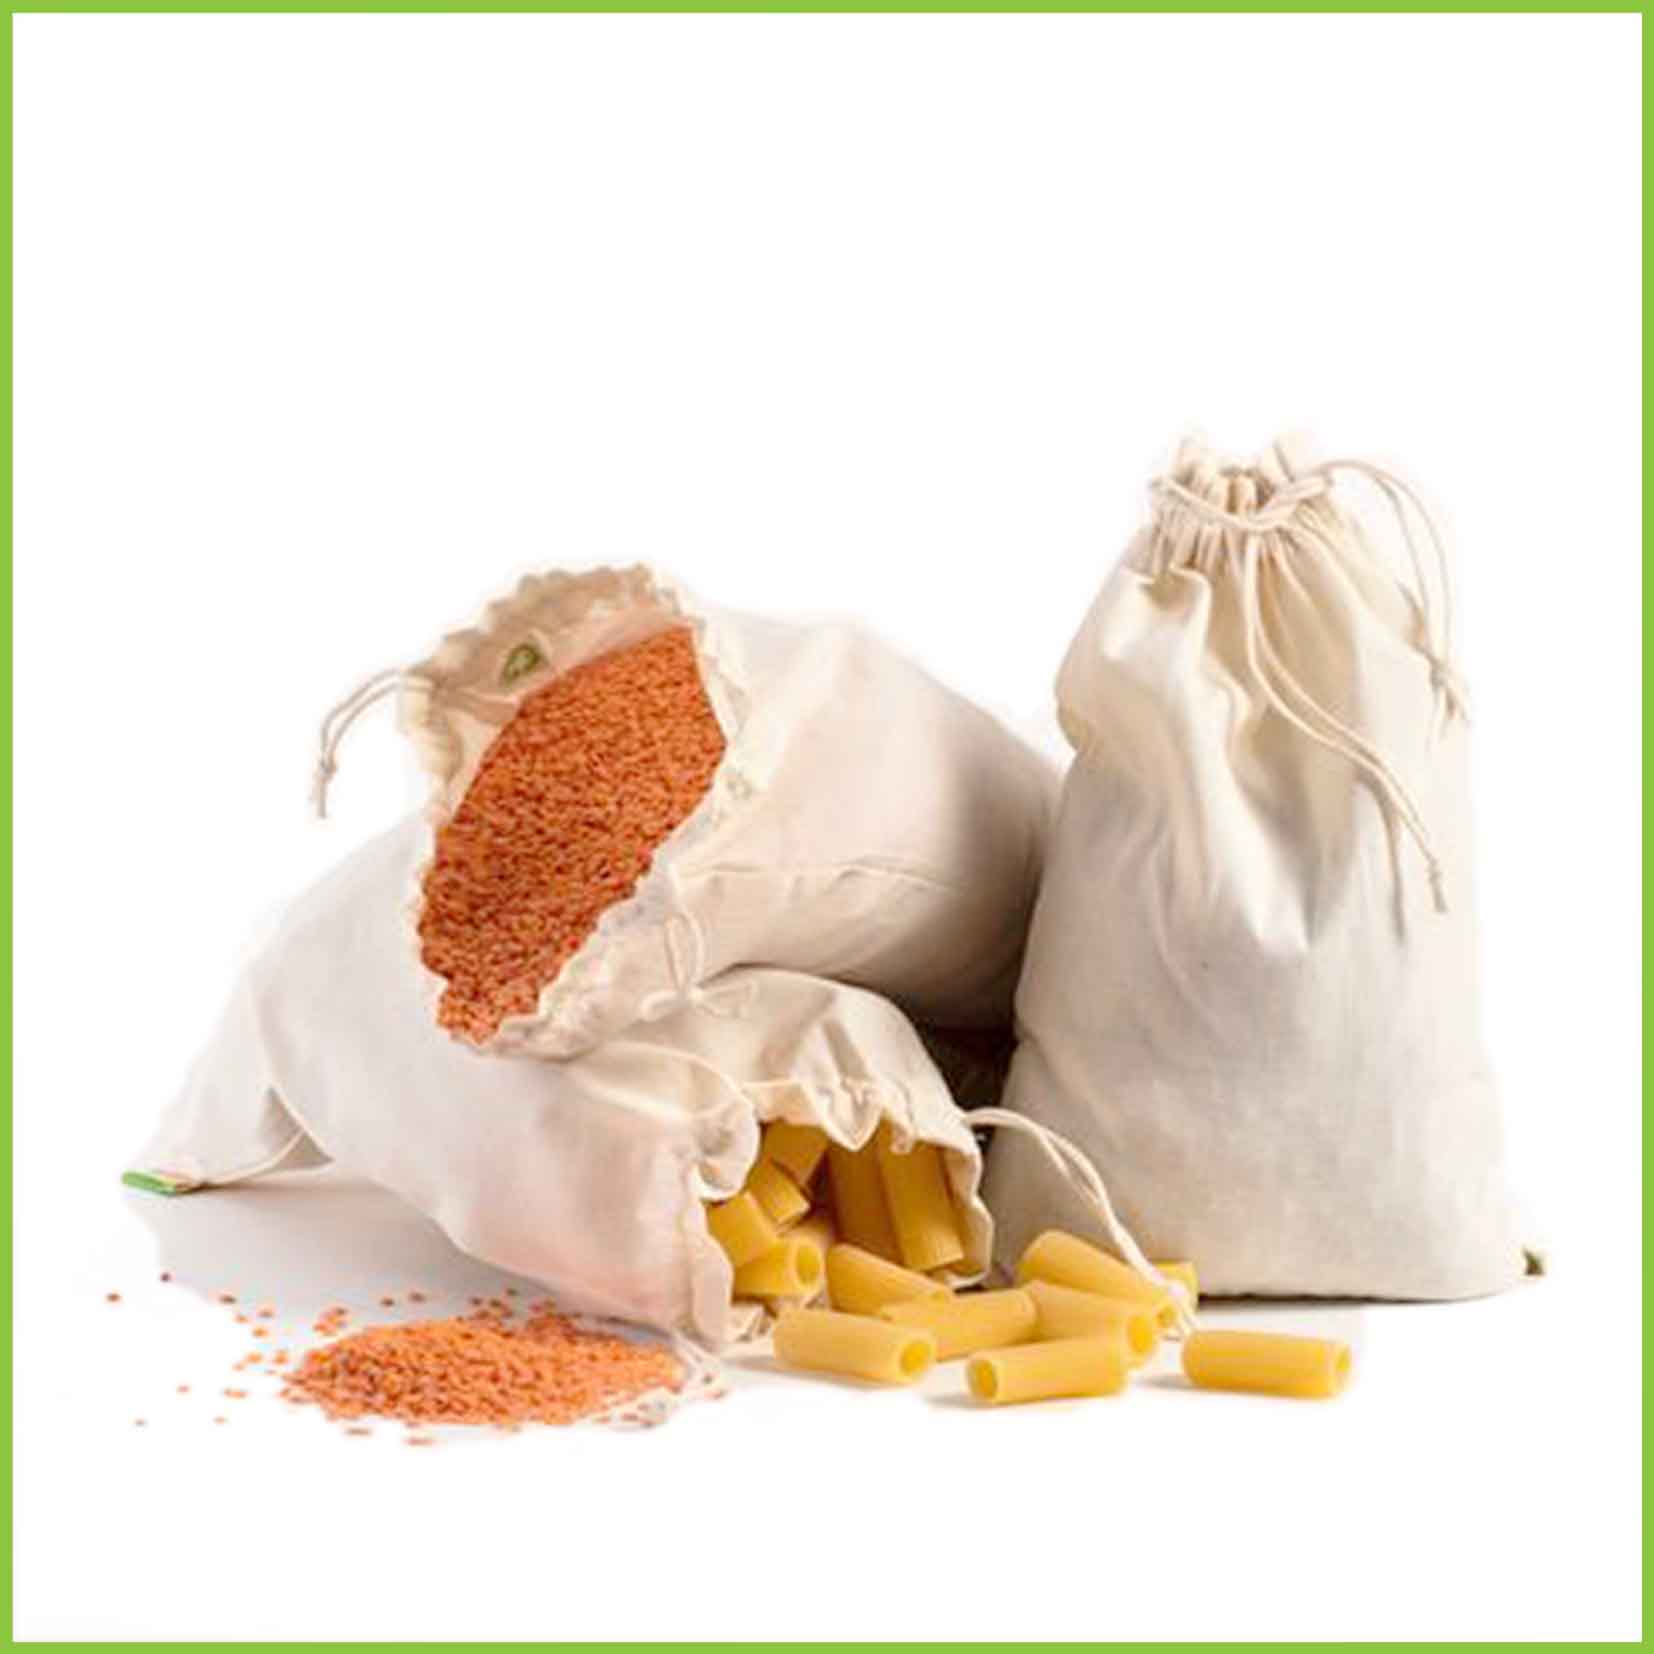 Three bulk bin bags holding dried foods, with pull string closures.